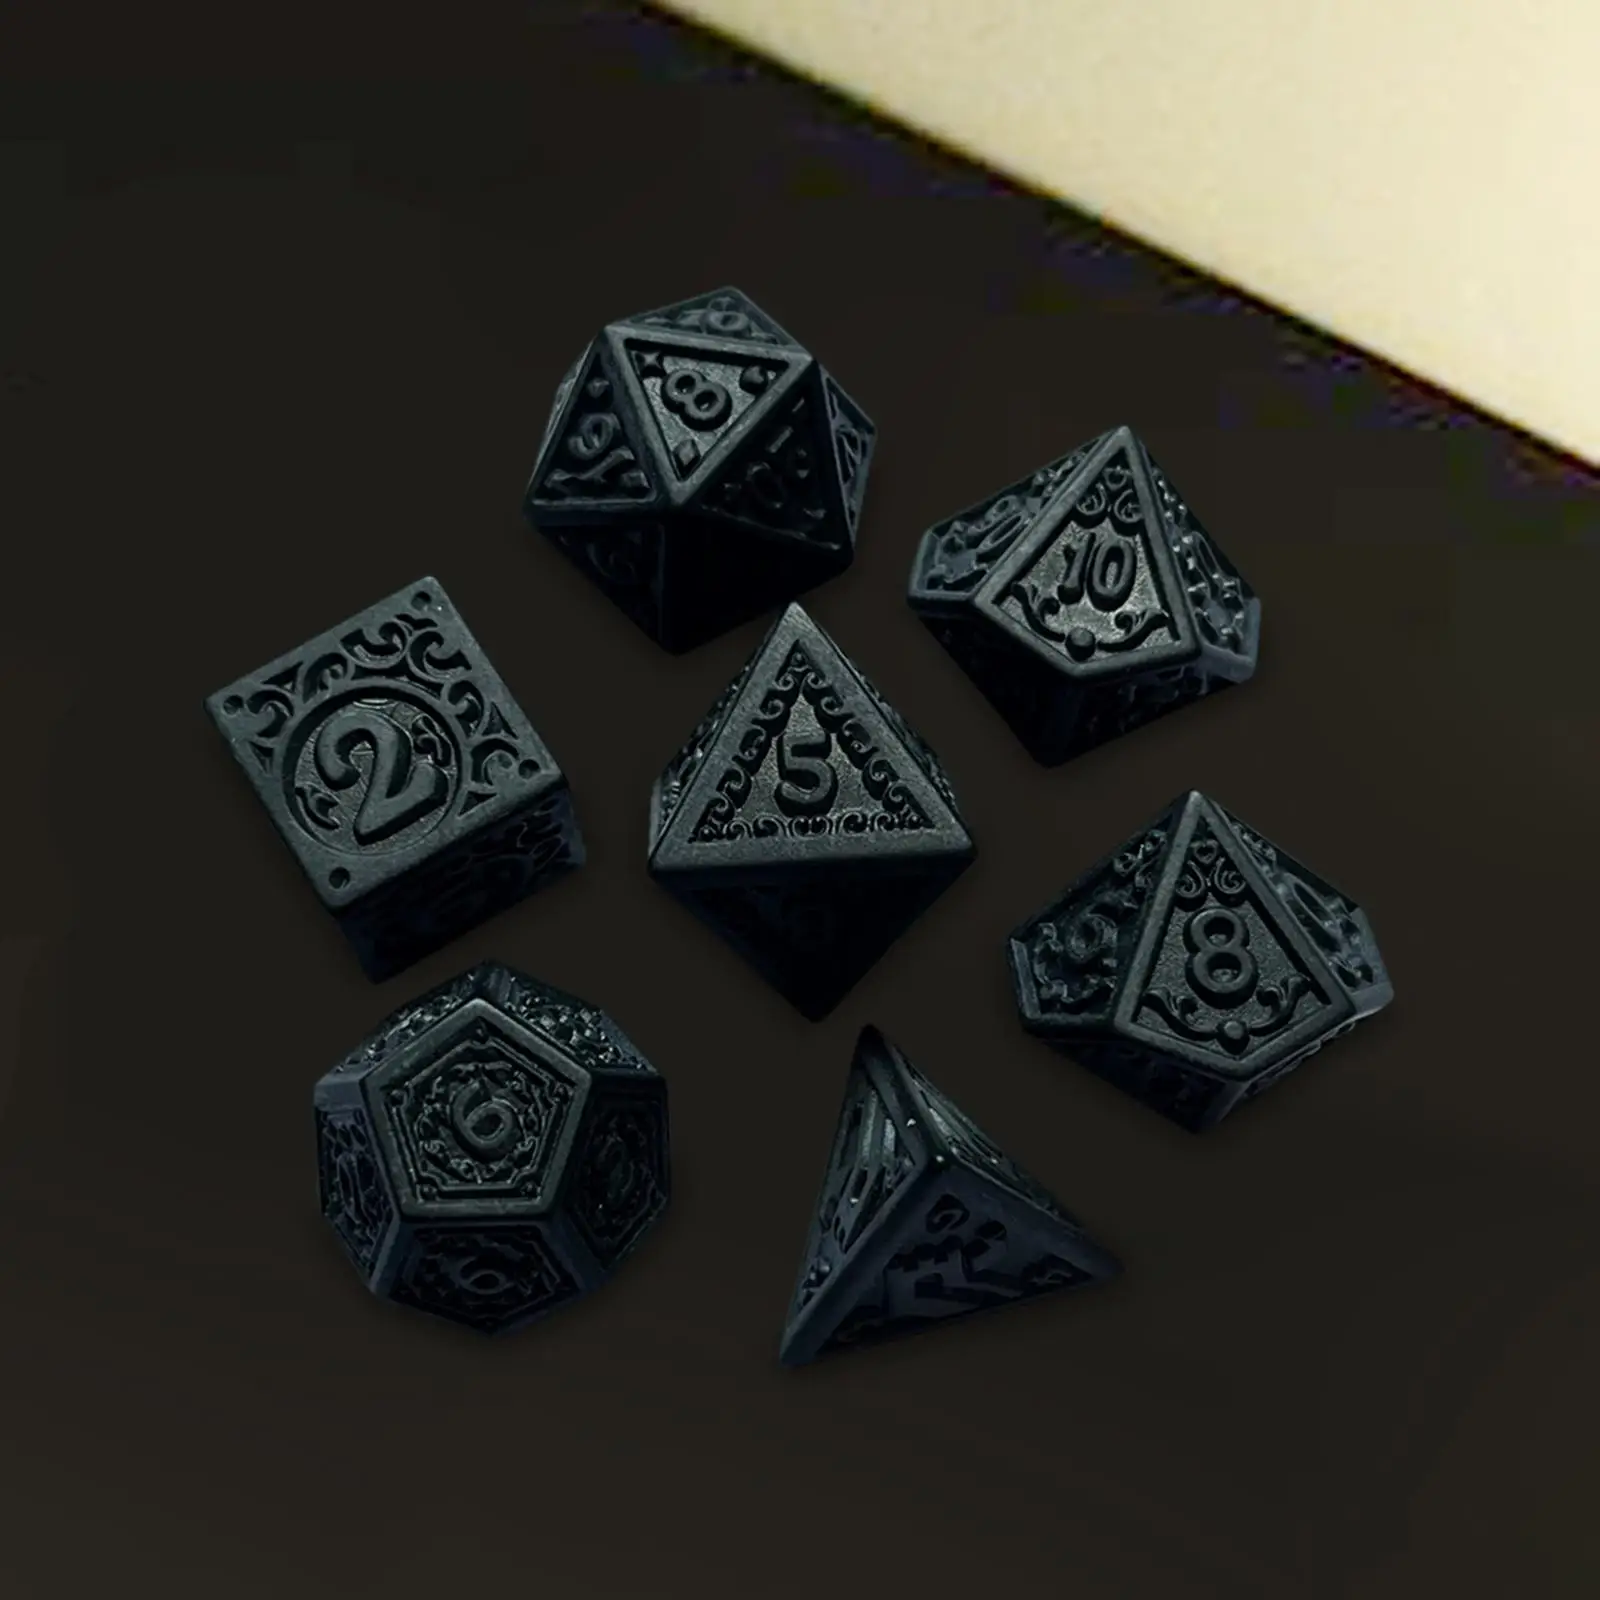 7 Pieces Polyhedral Dice Retro Style Handmade Party Favors Gift Black Board Game